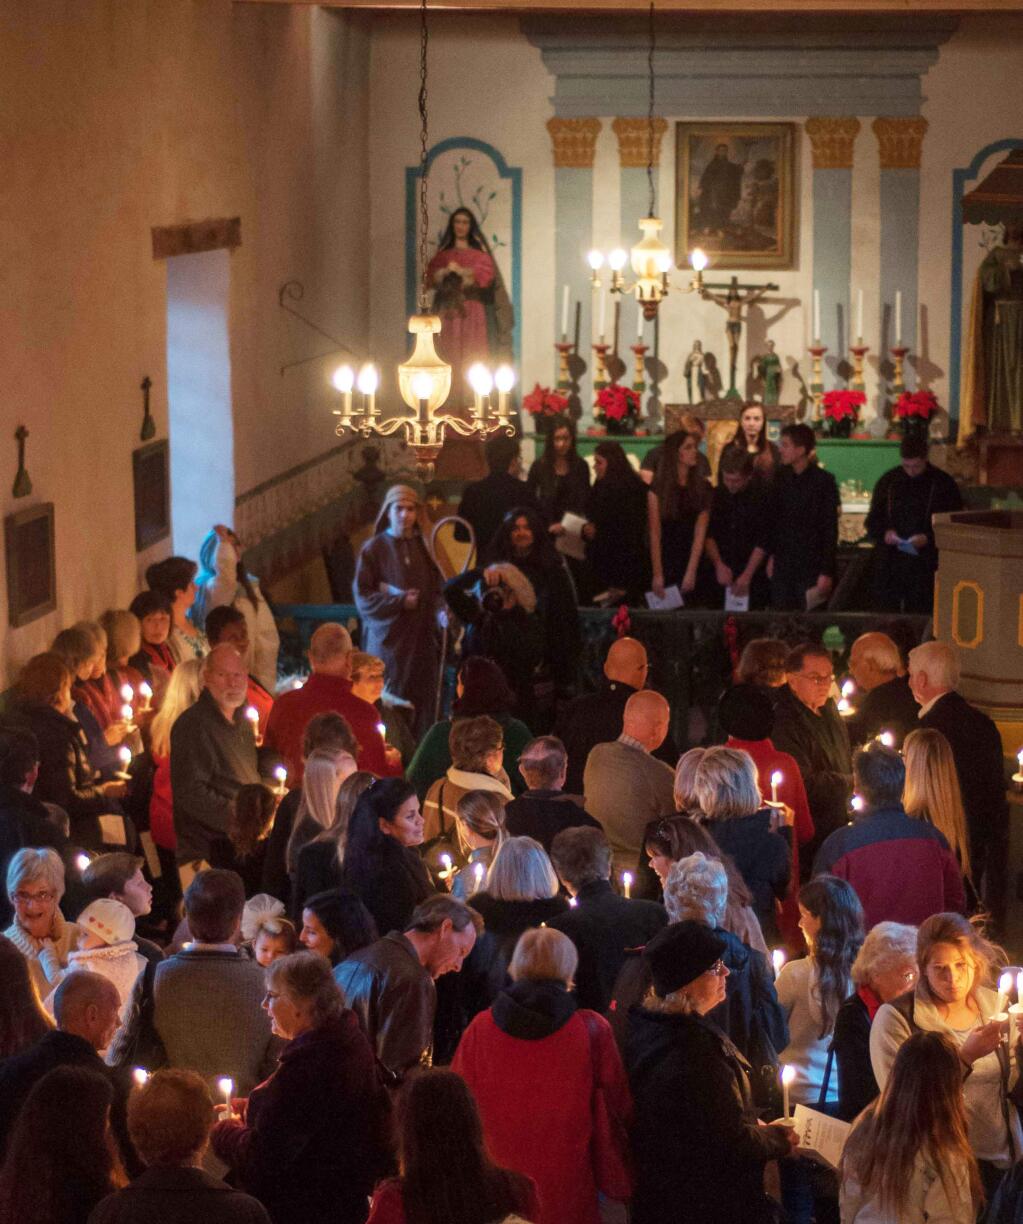 Christmas at the Mission in the candle-lit chapel will take place on Saturday, Dec. 9 this year. Tickets are now available at the Mission for a donation. (Bob Alwitt)